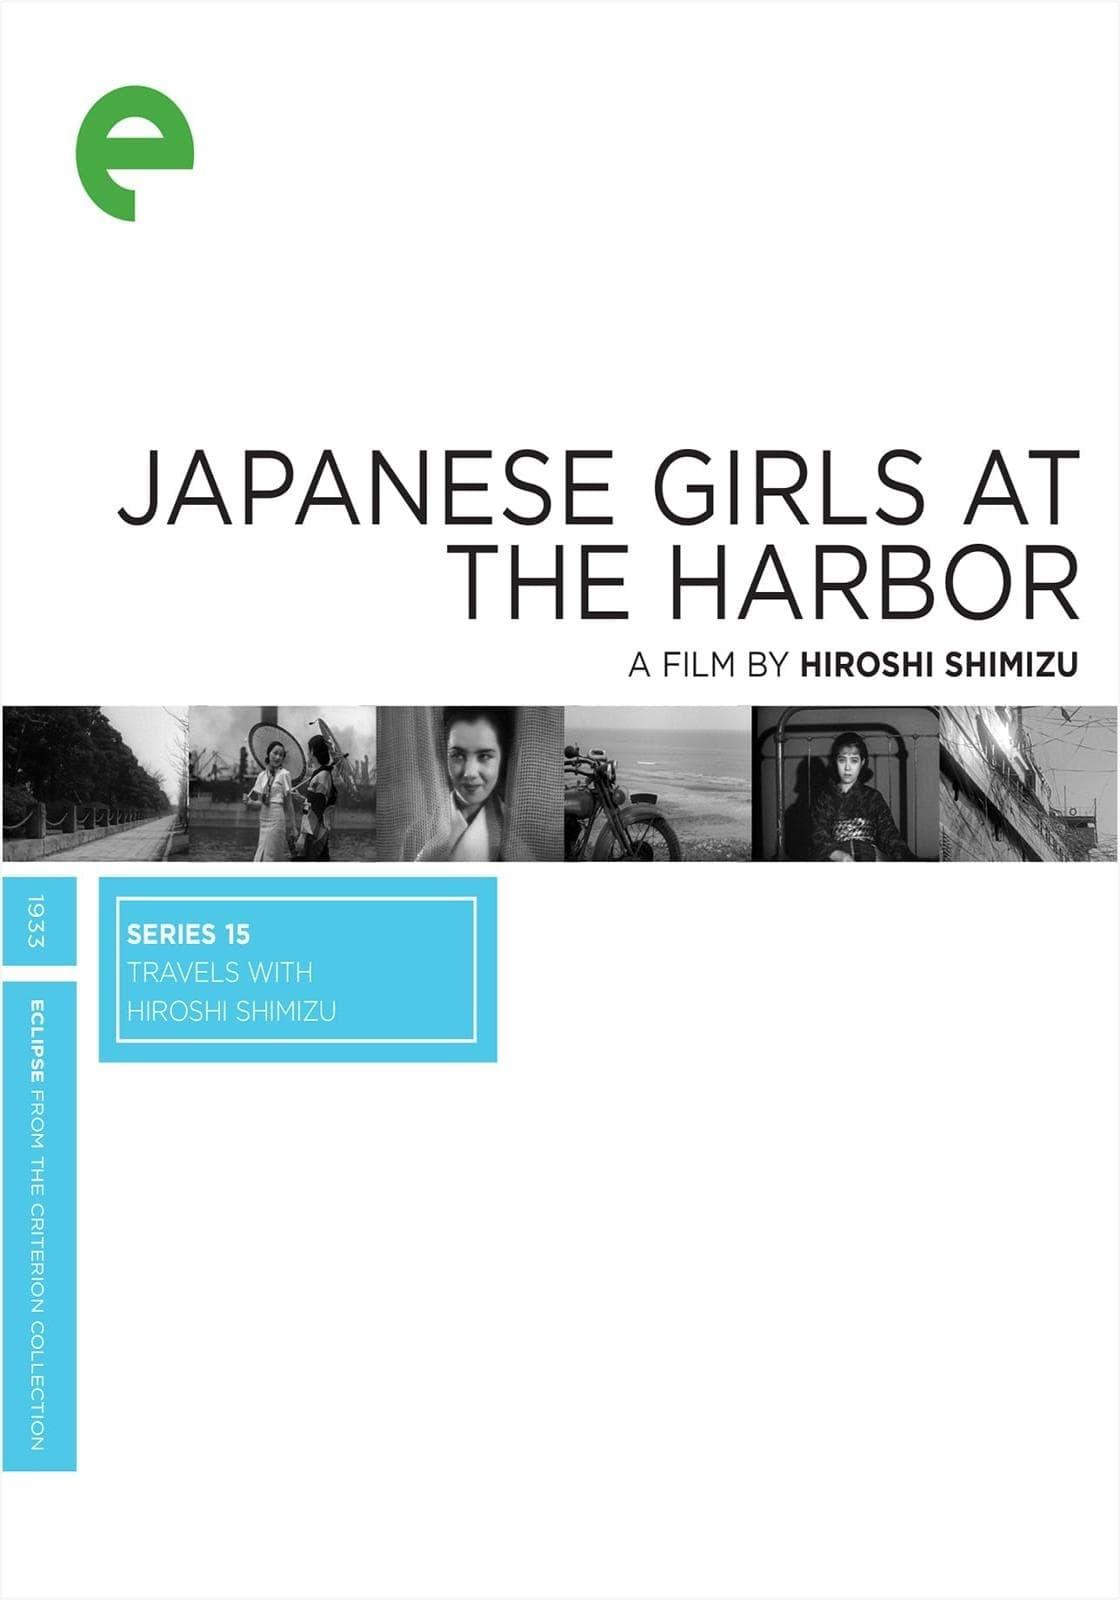 Japanese Girls at the Harbor poster